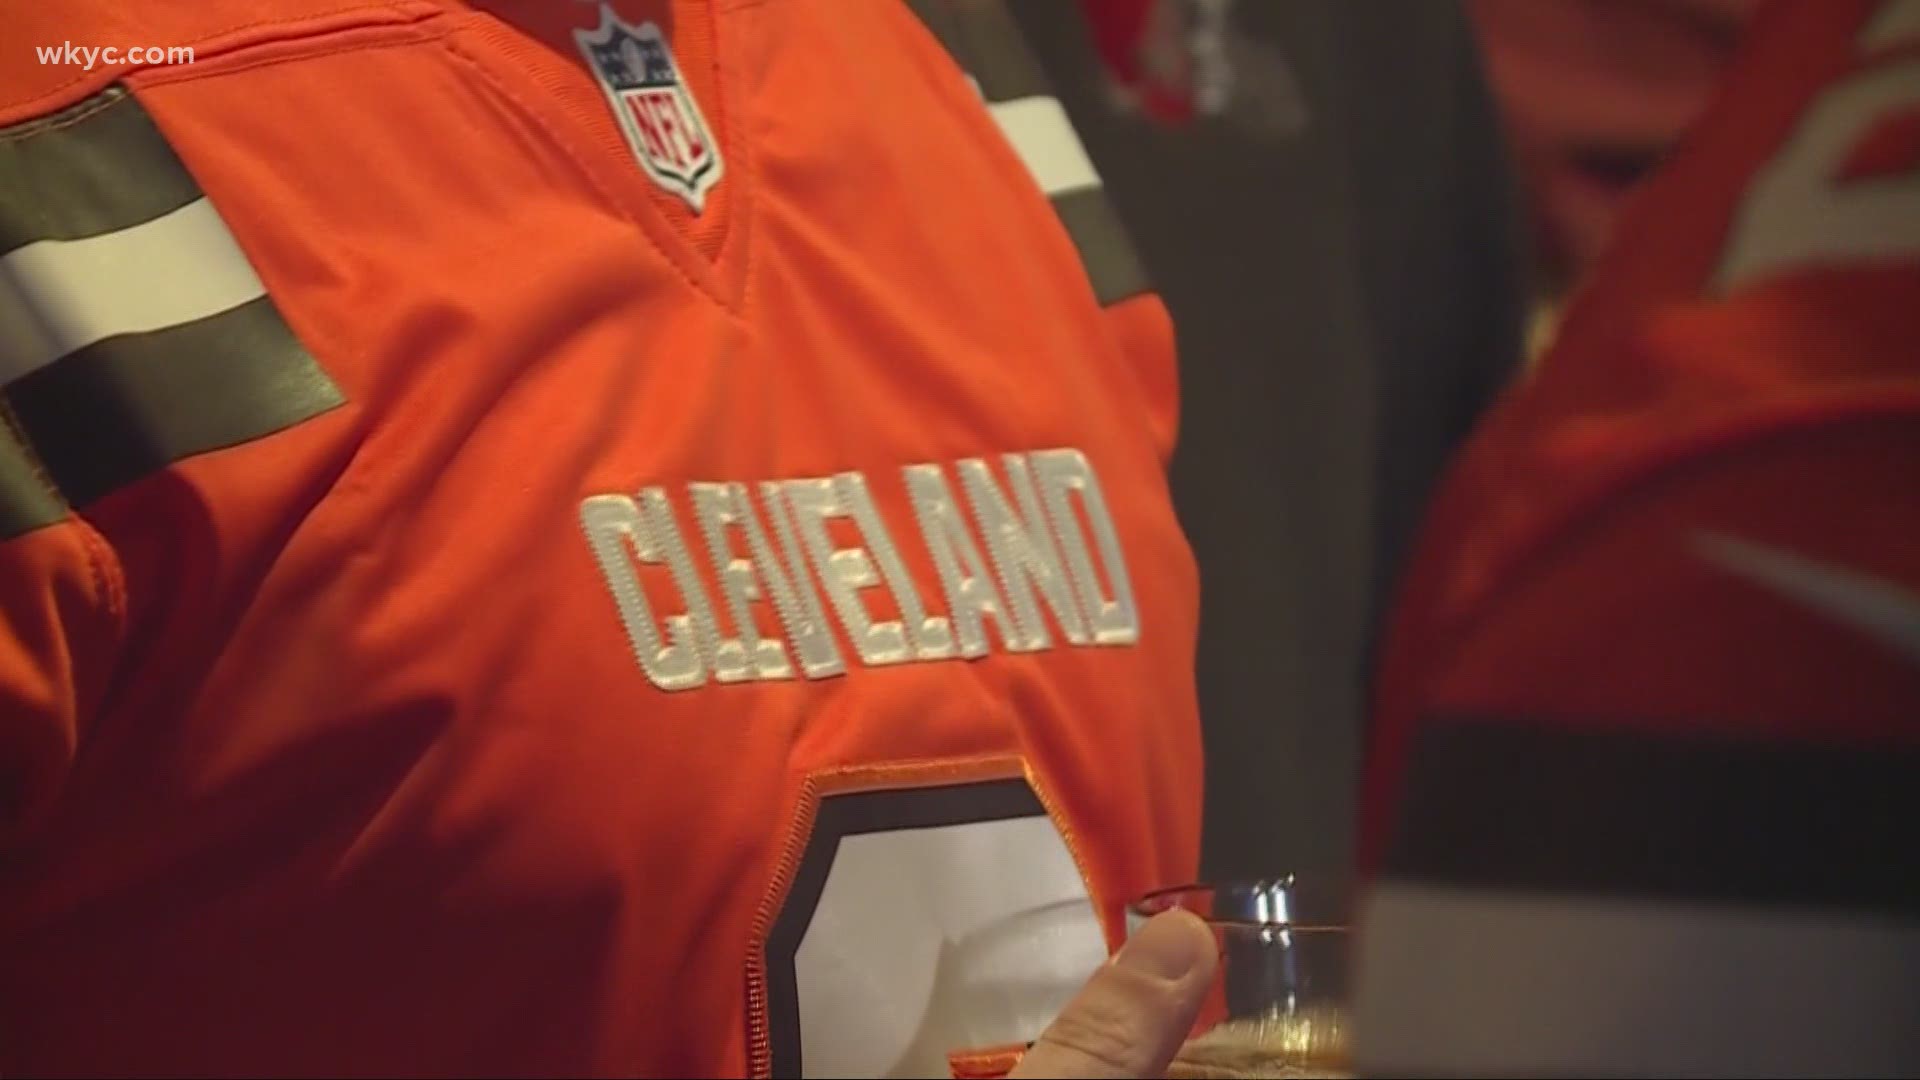 Win or lose, Browns Backers remain optimistic. Andrew Horansky reports.